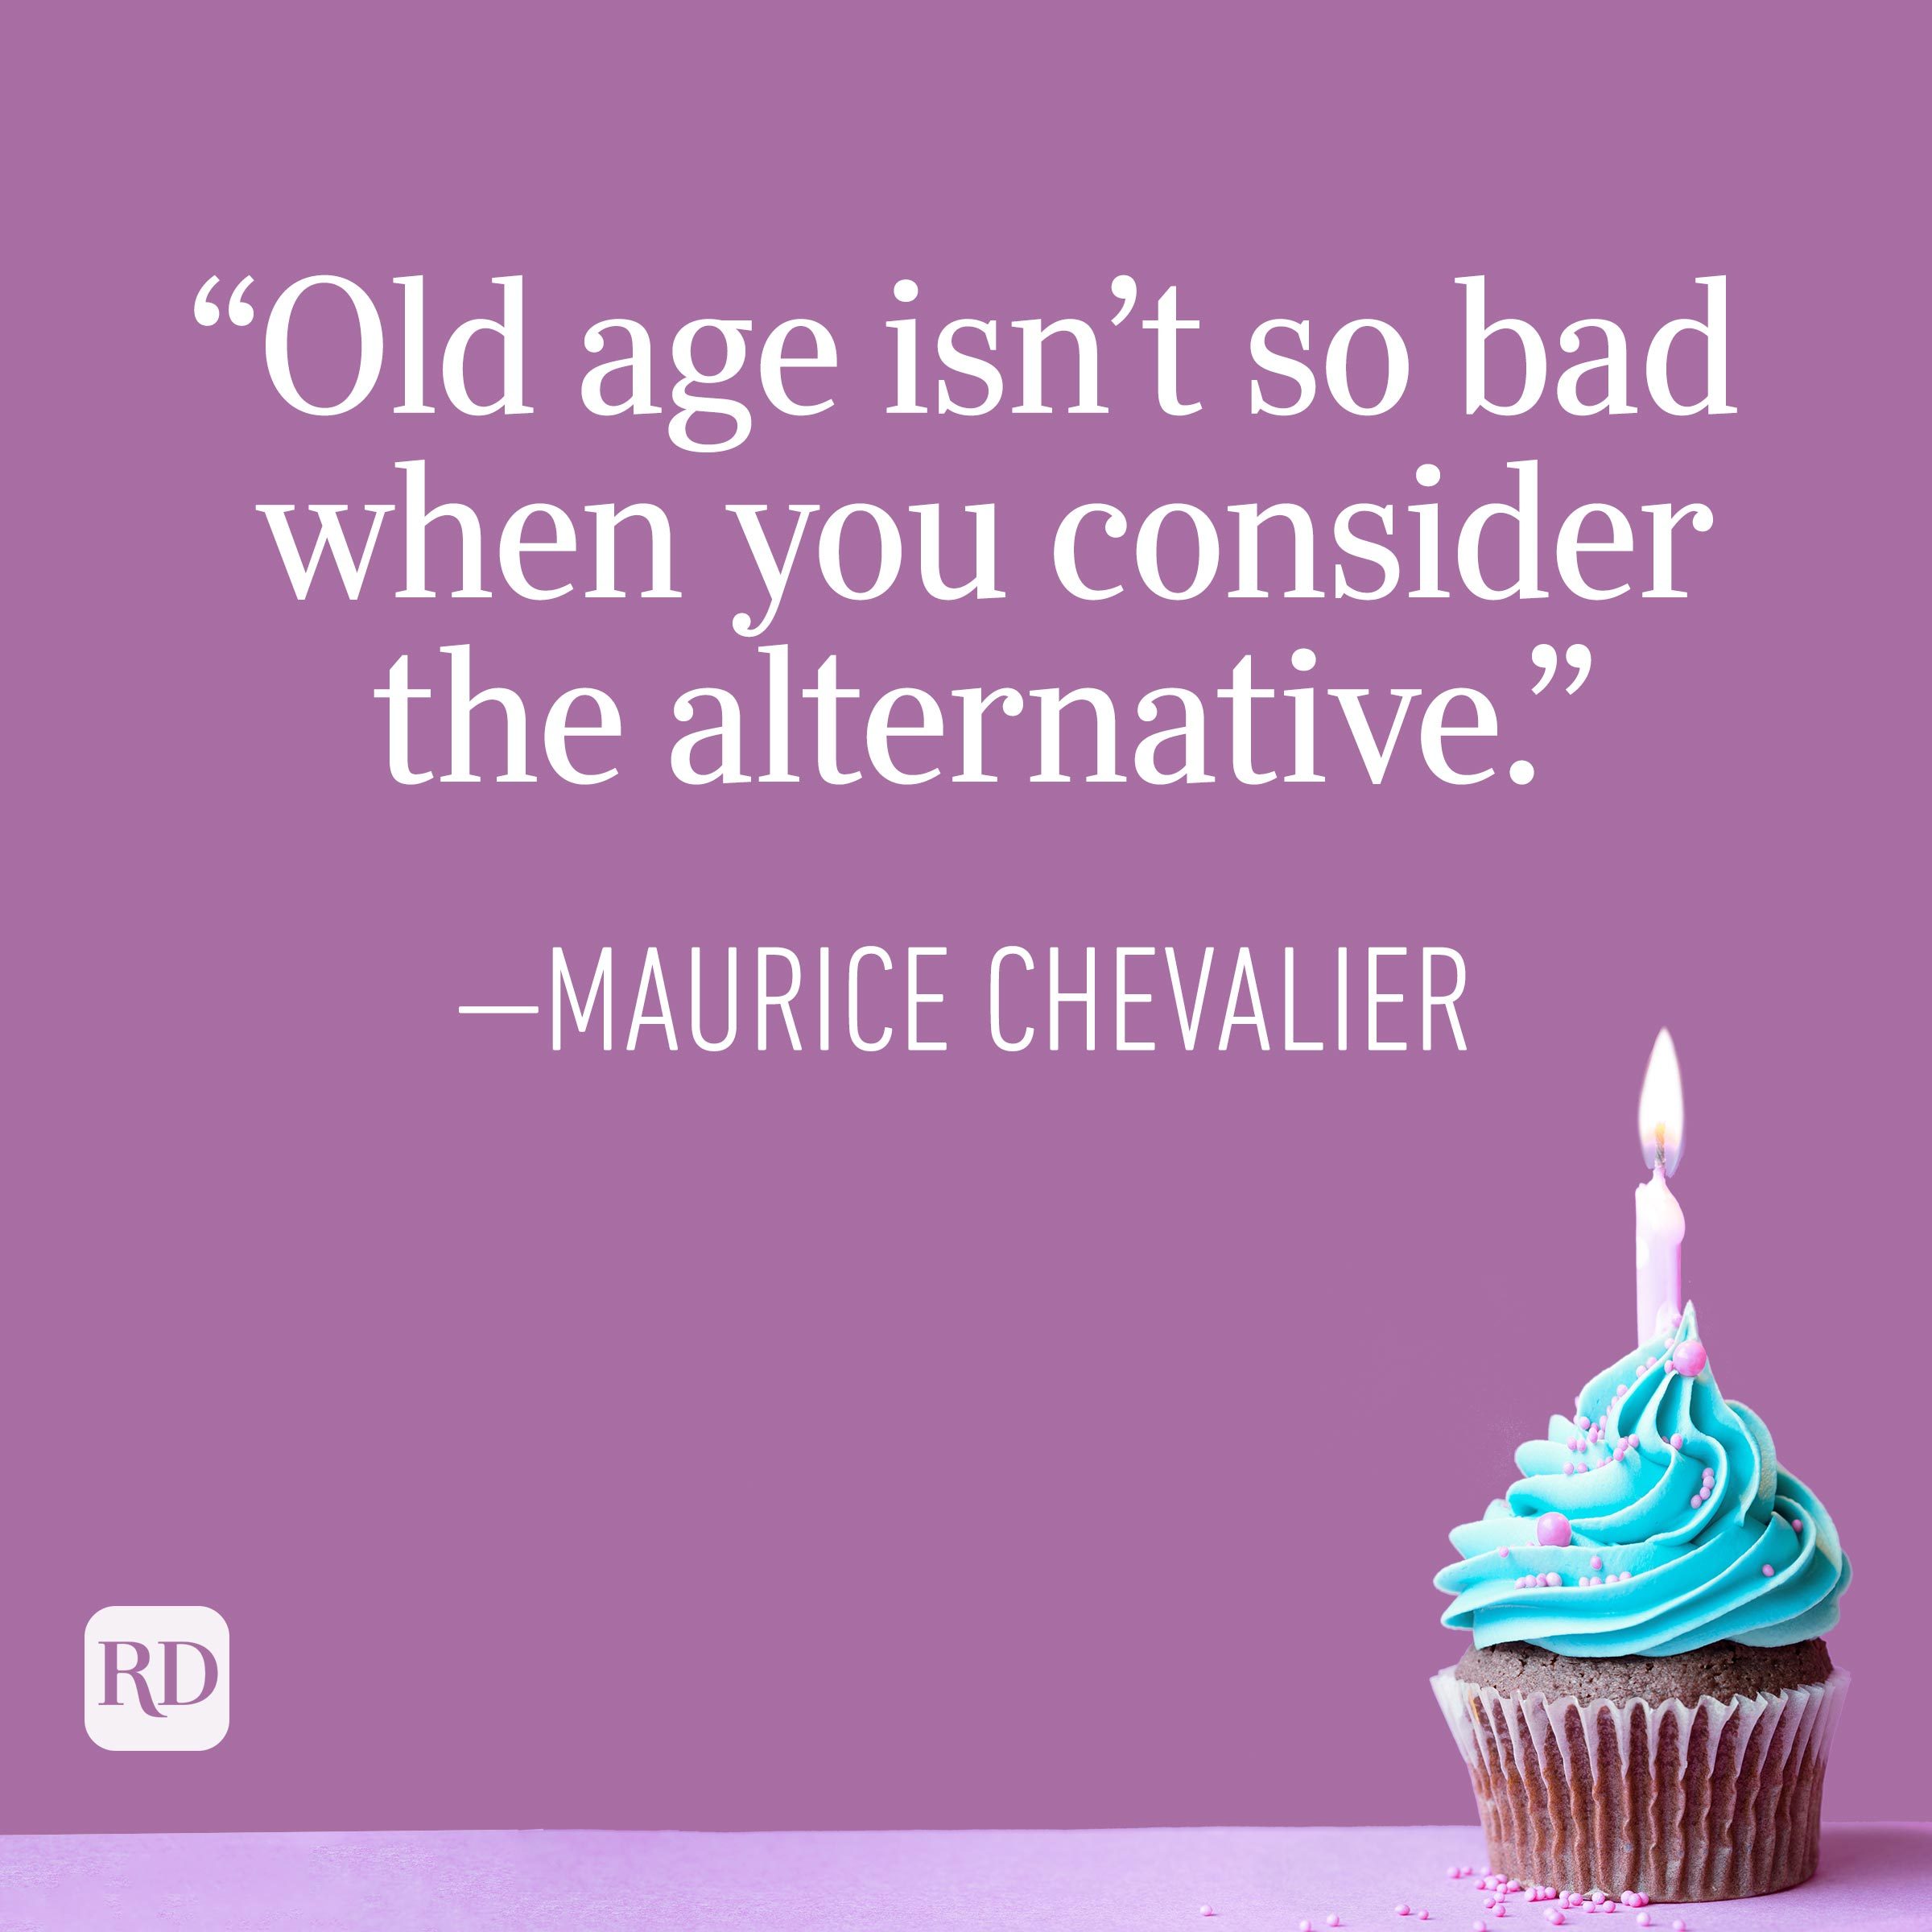 "Old age isn't so bad when you consider the alternative." —Maurice Chavelier